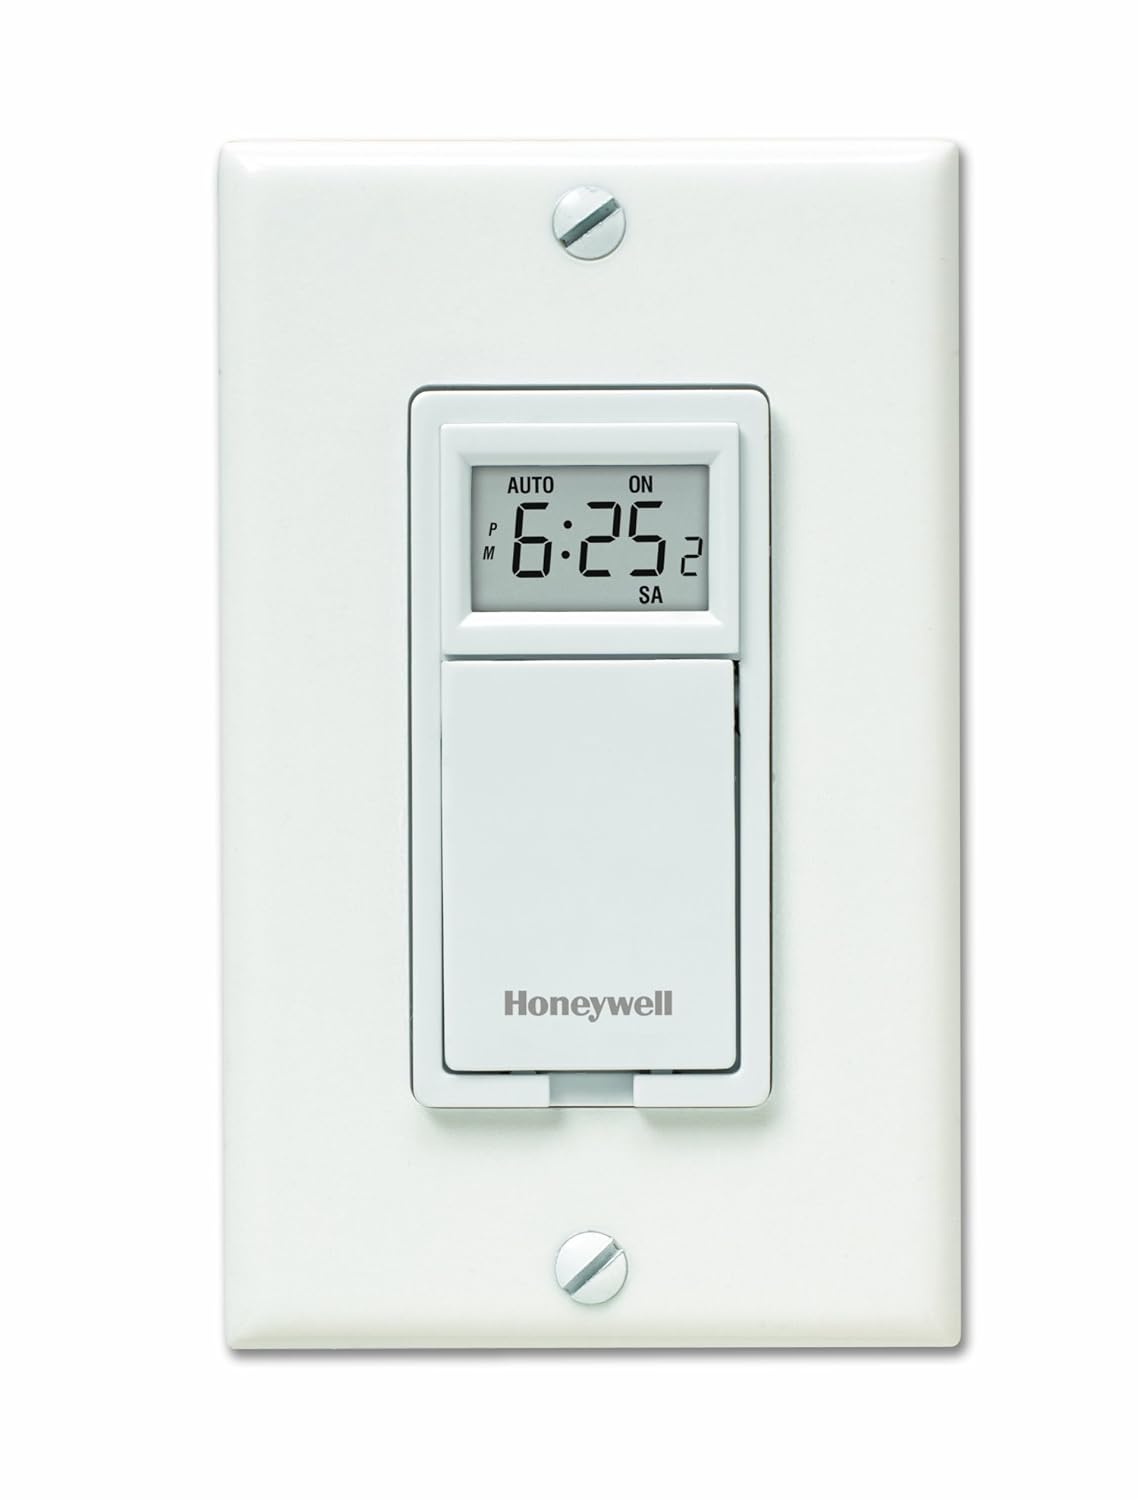 honeywell 7 day programmable timer manual